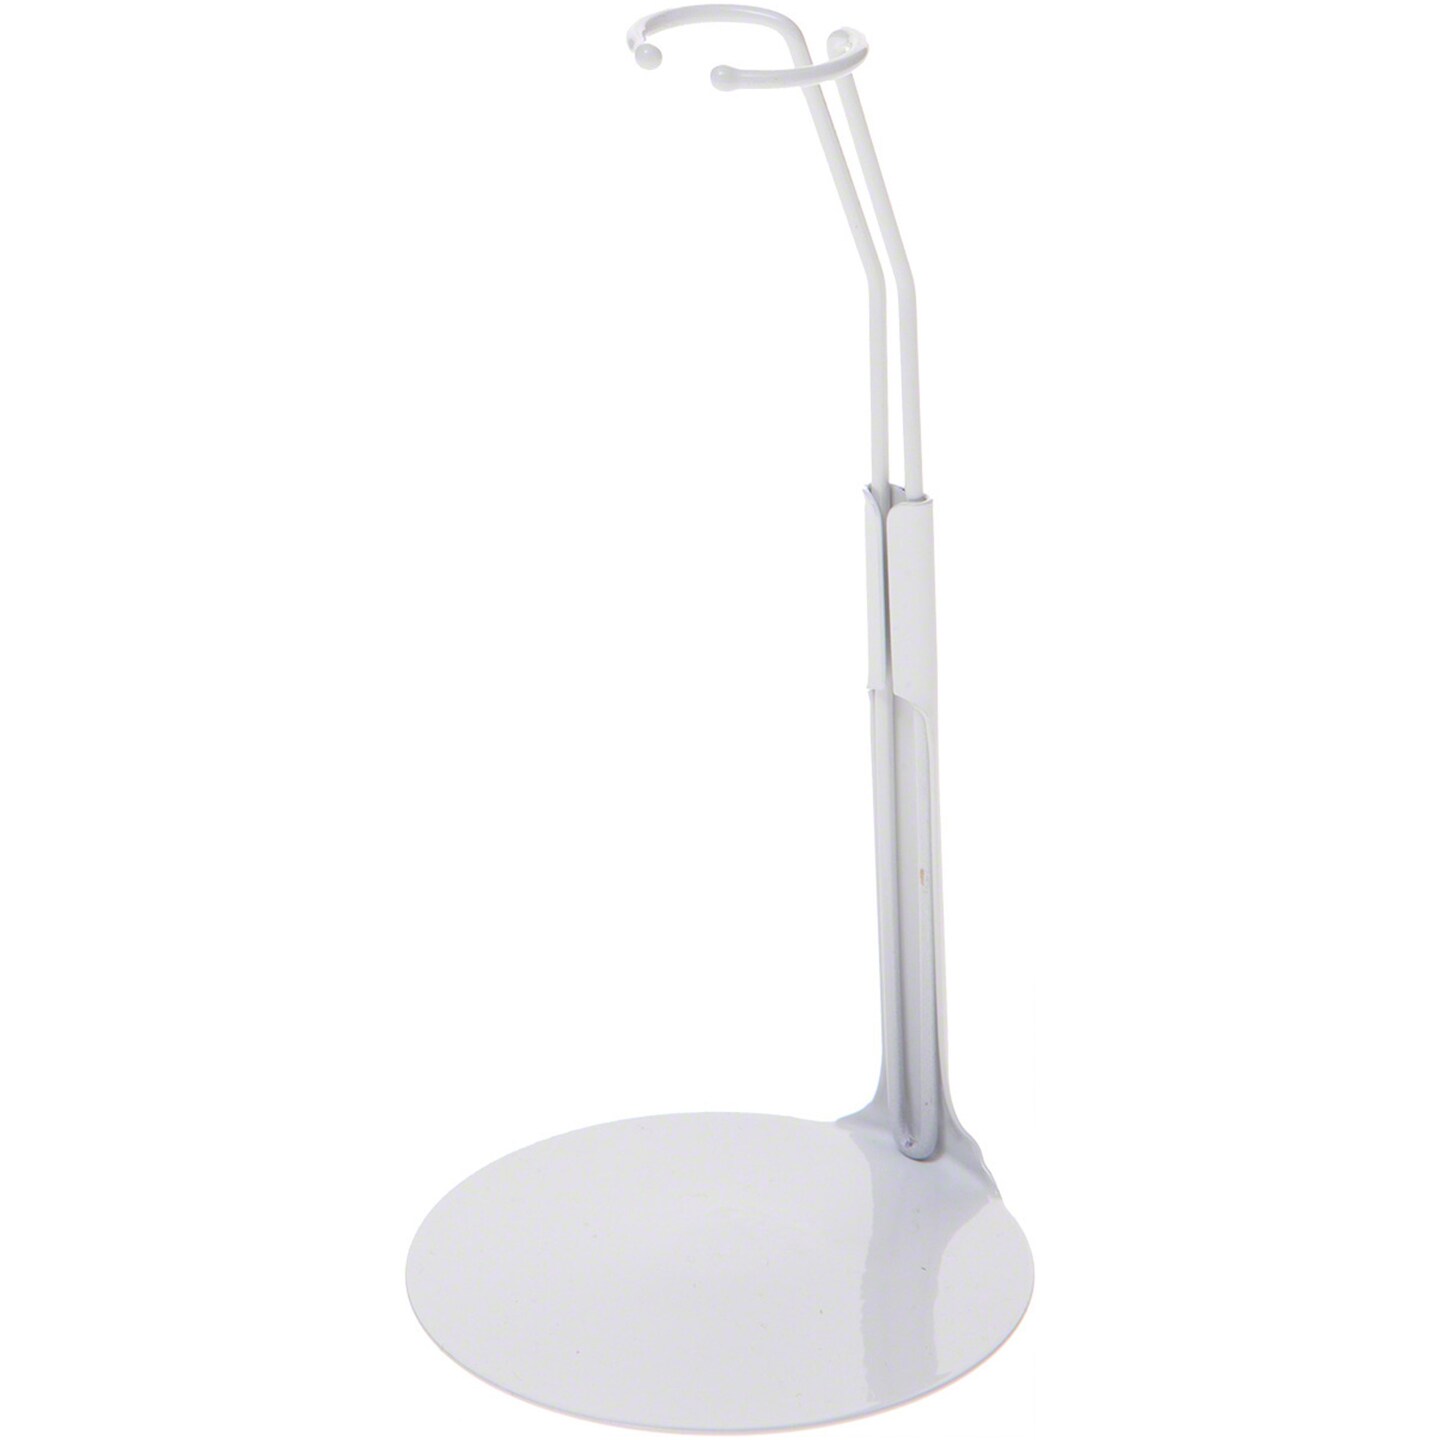 Kaiser 2301 White Adjustable Doll Stand, fits 9 to 10 inch Dolls, waist width adjusts from 1 to 1.25 inches